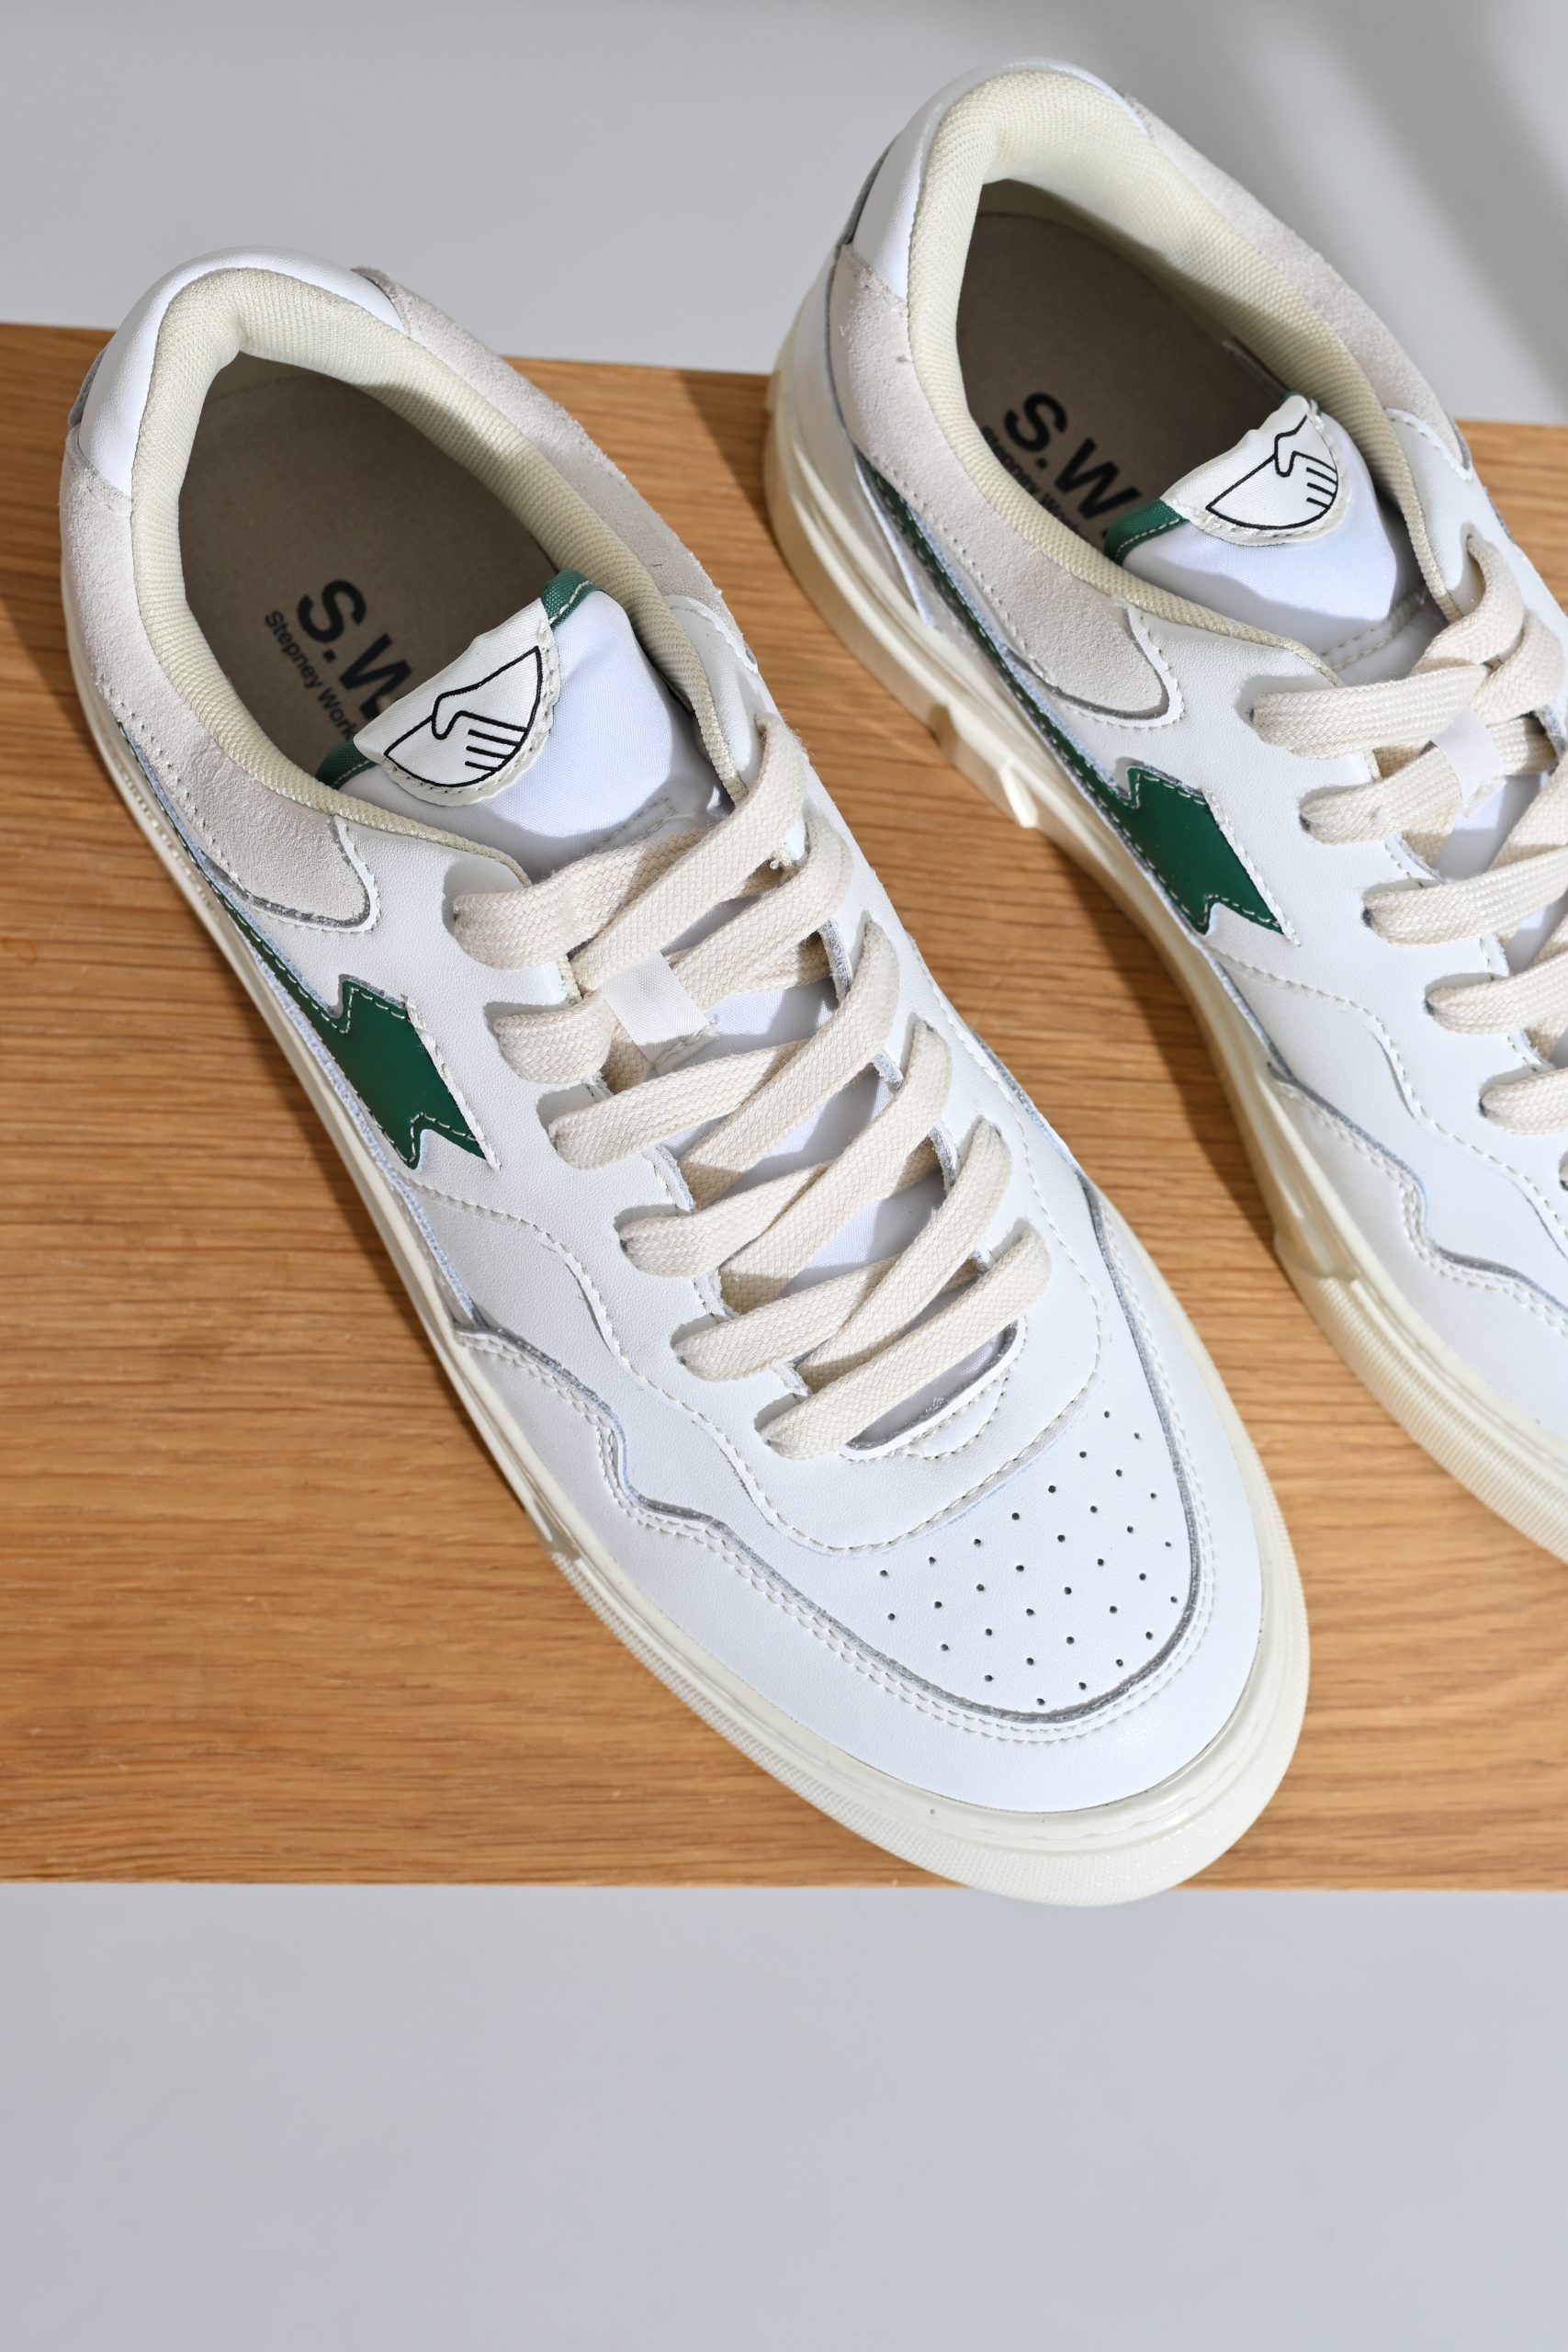 SWC Sneakers PEARL S-STRIKE Leather white green